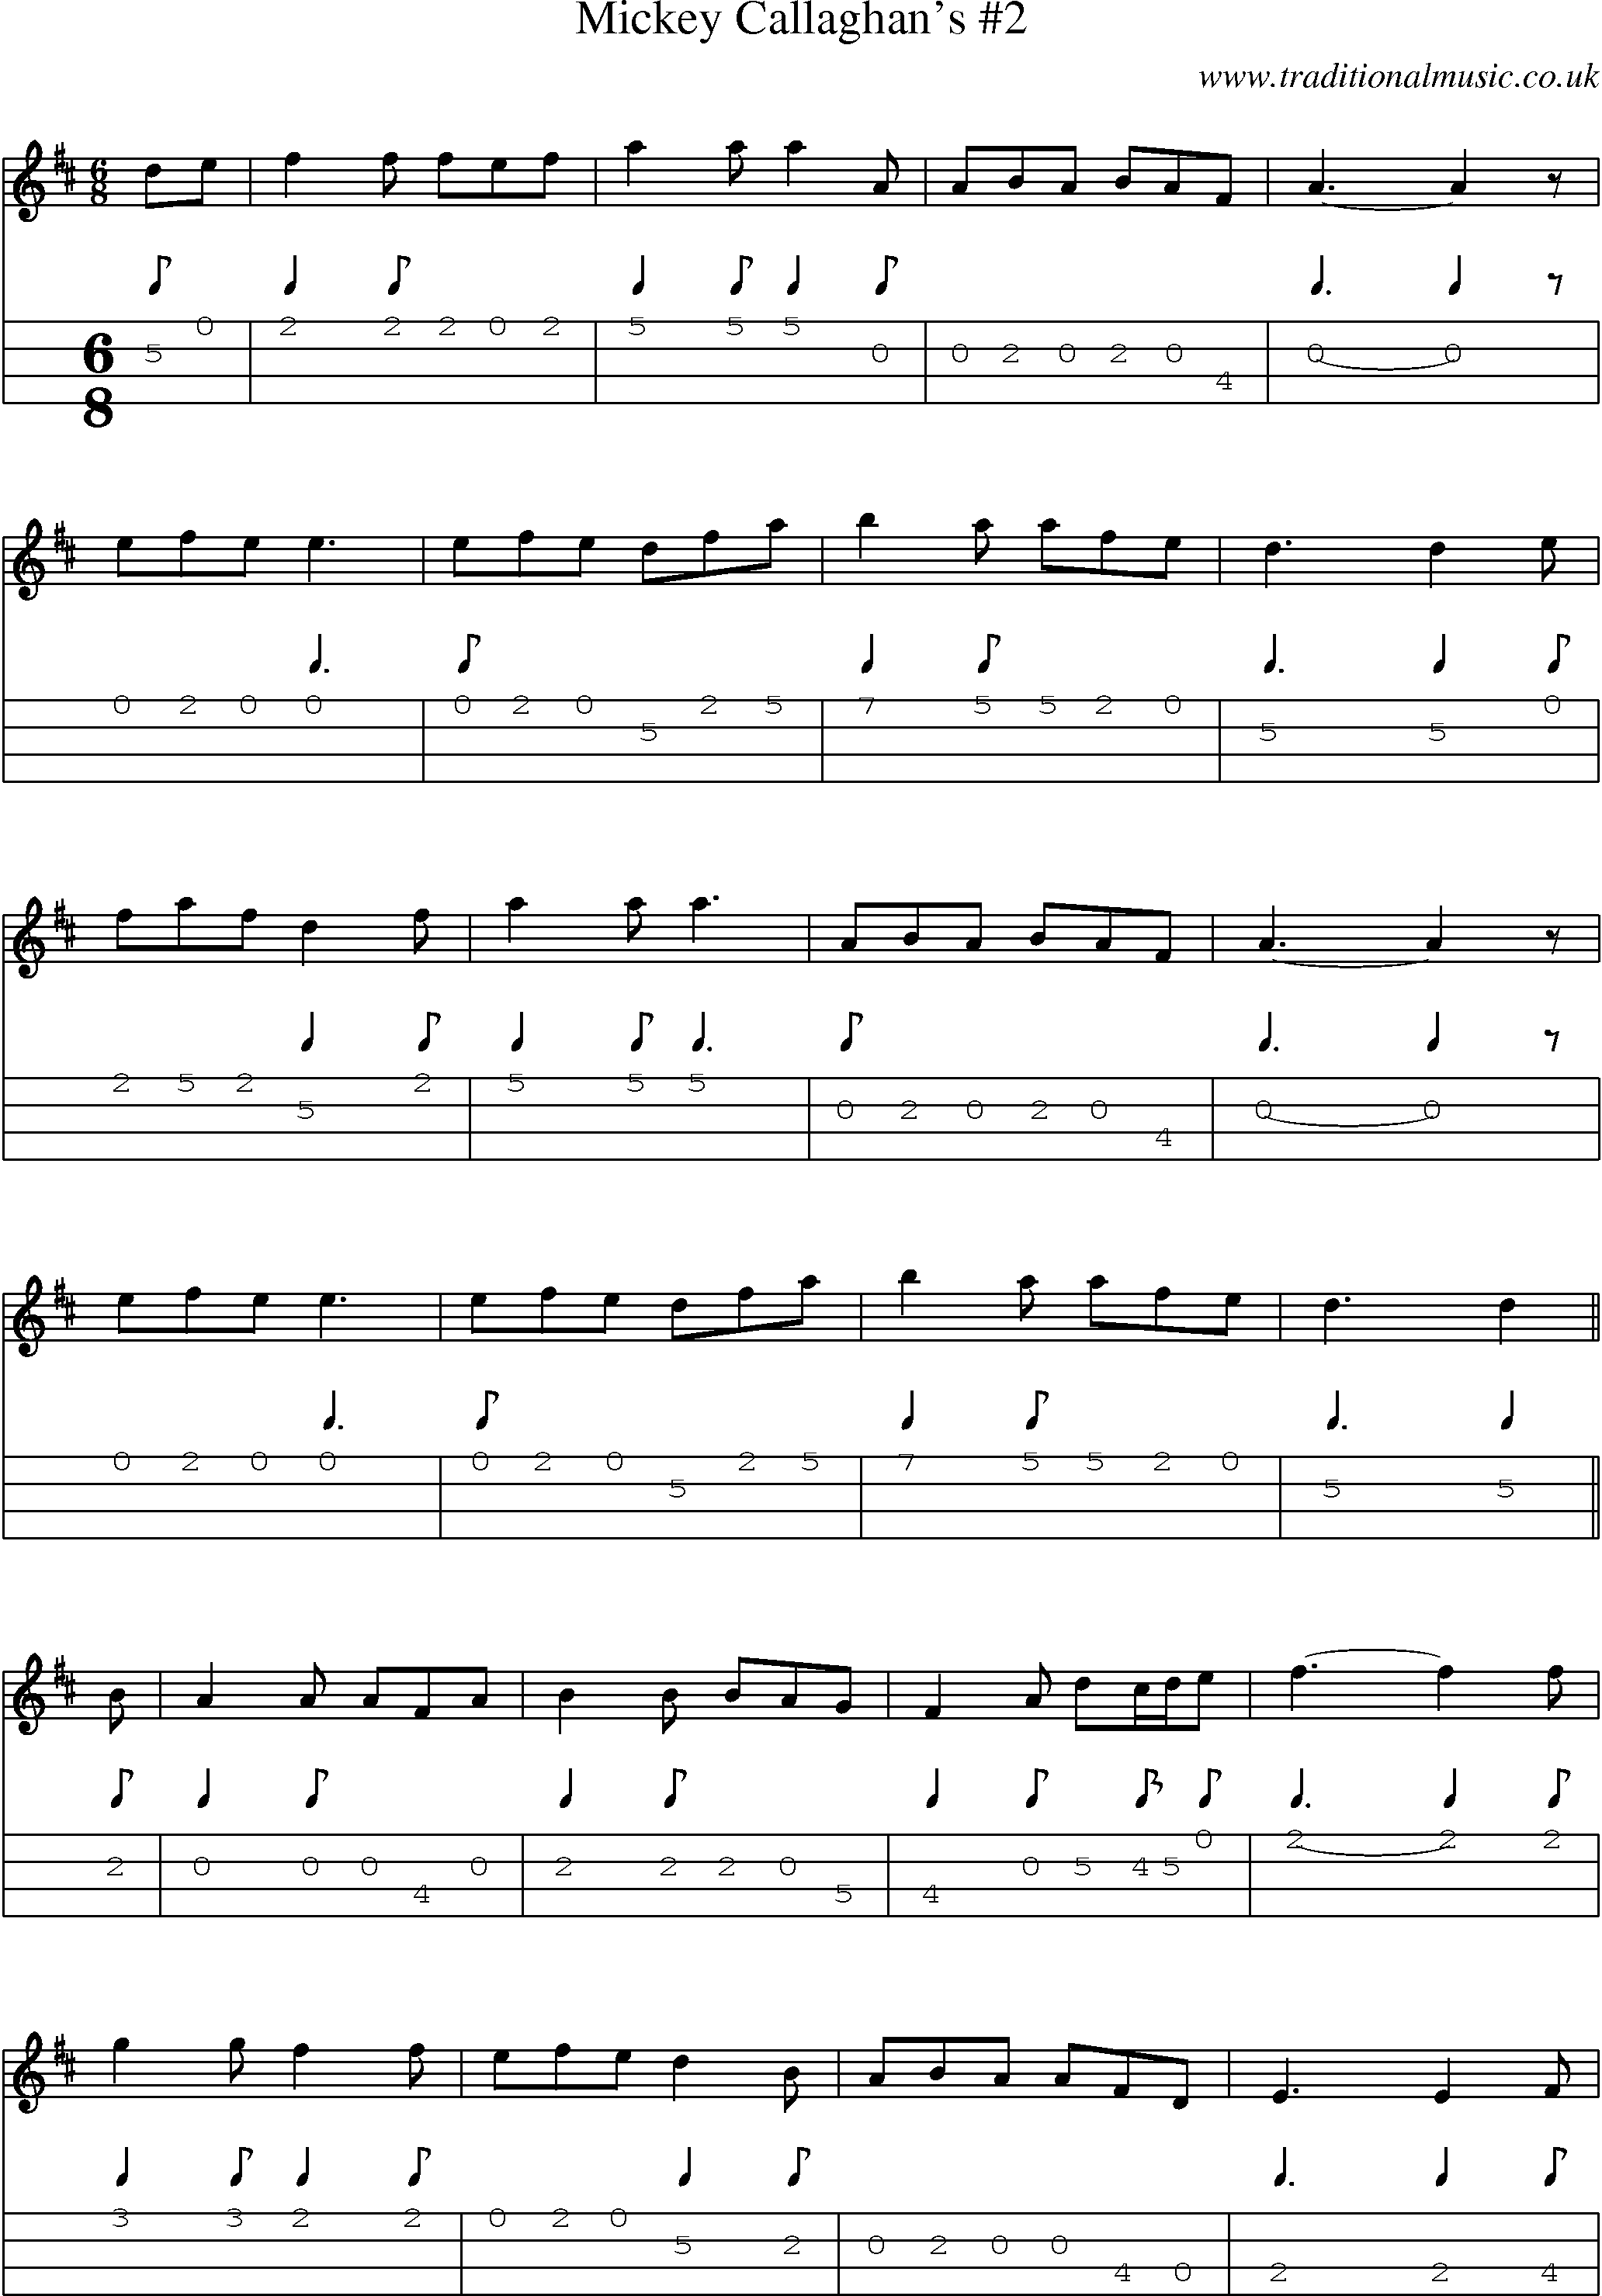 Music Score and Mandolin Tabs for Mickey Callaghans 2